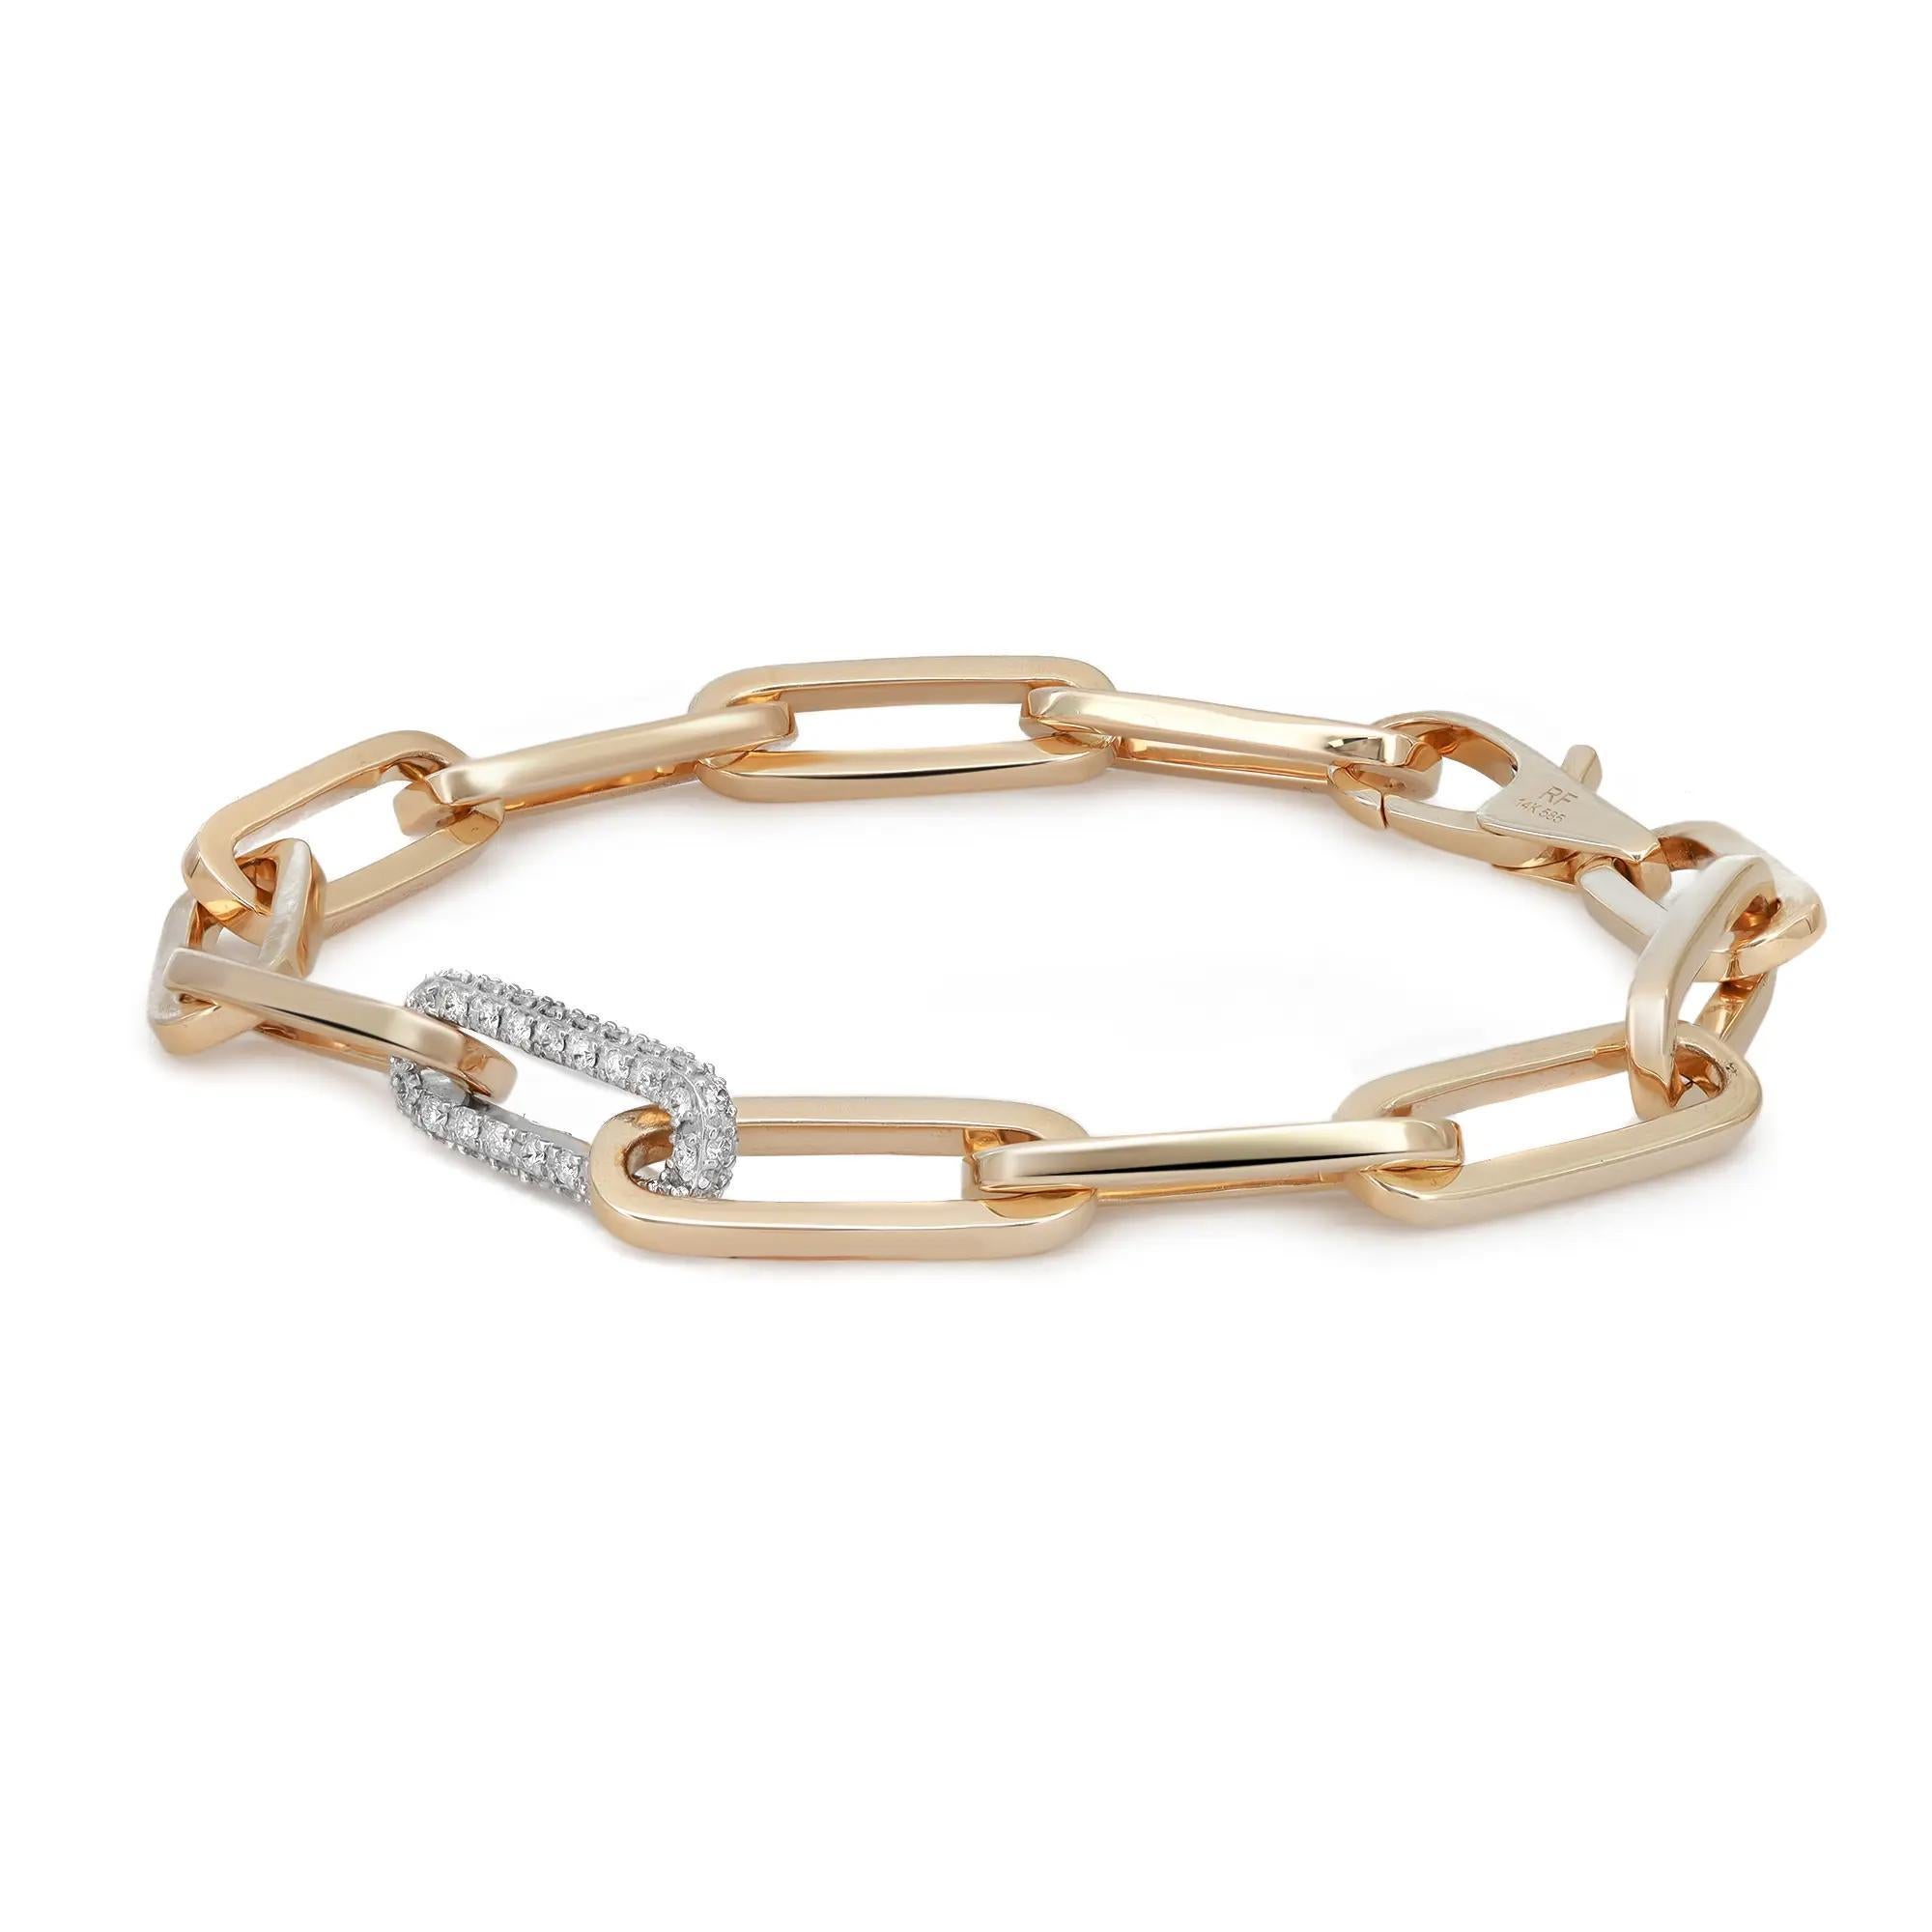 Introducing the sleek and modern paperclip-link bracelet, a sophisticated piece crafted from 14K white and yellow gold. This exquisite bracelet is adorned with shimmering pavé white diamonds, totaling 0.45 carats, featuring a single striking diamond